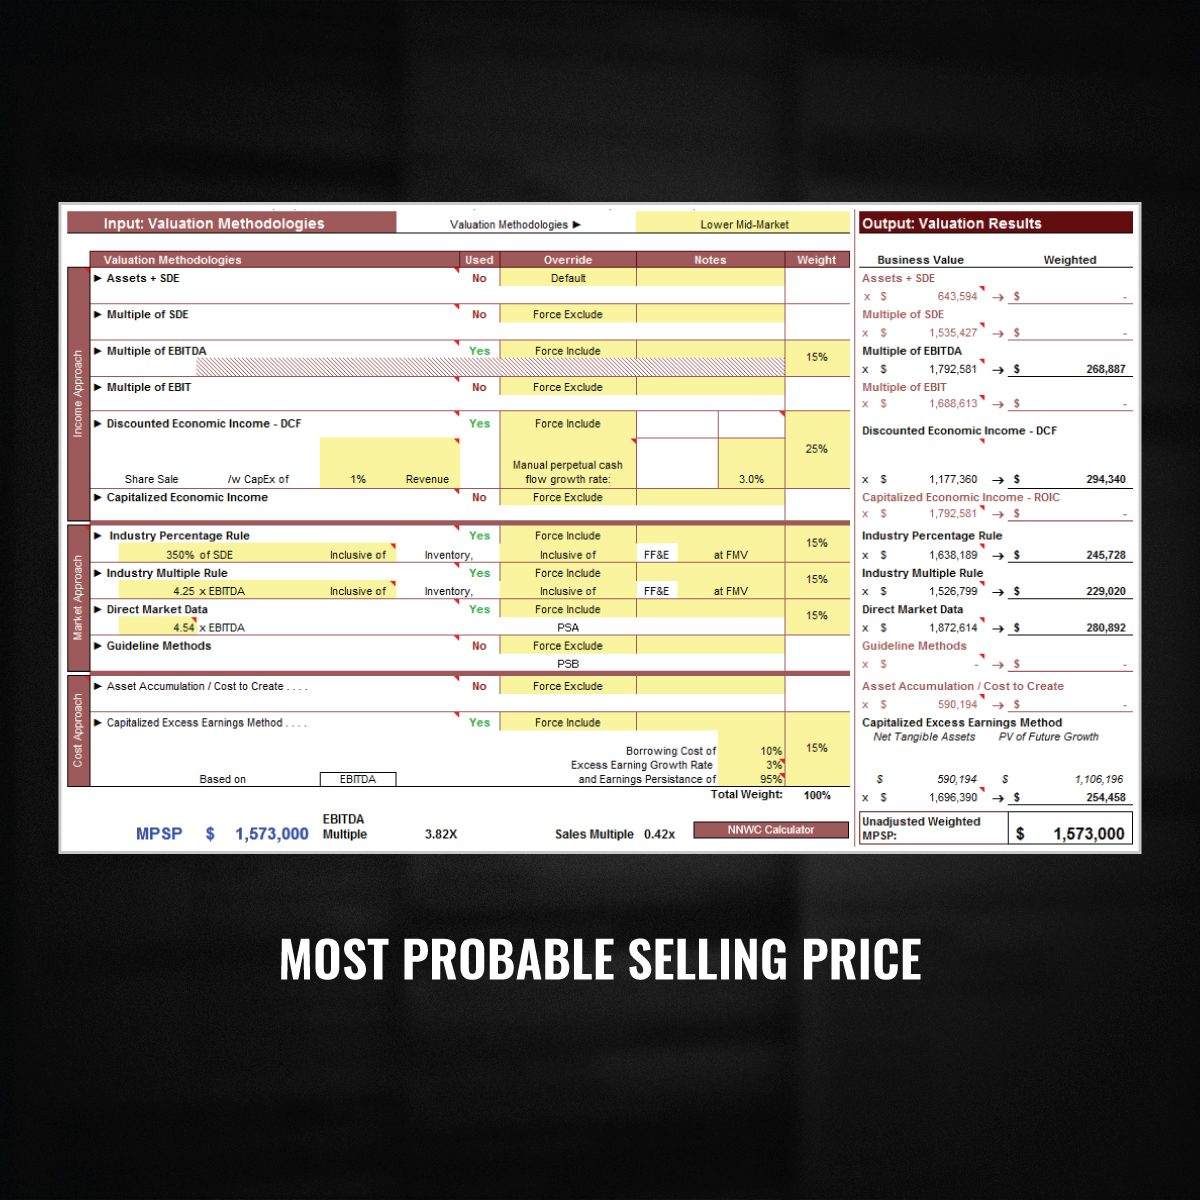 most probable selling price chart from financial analysis tool